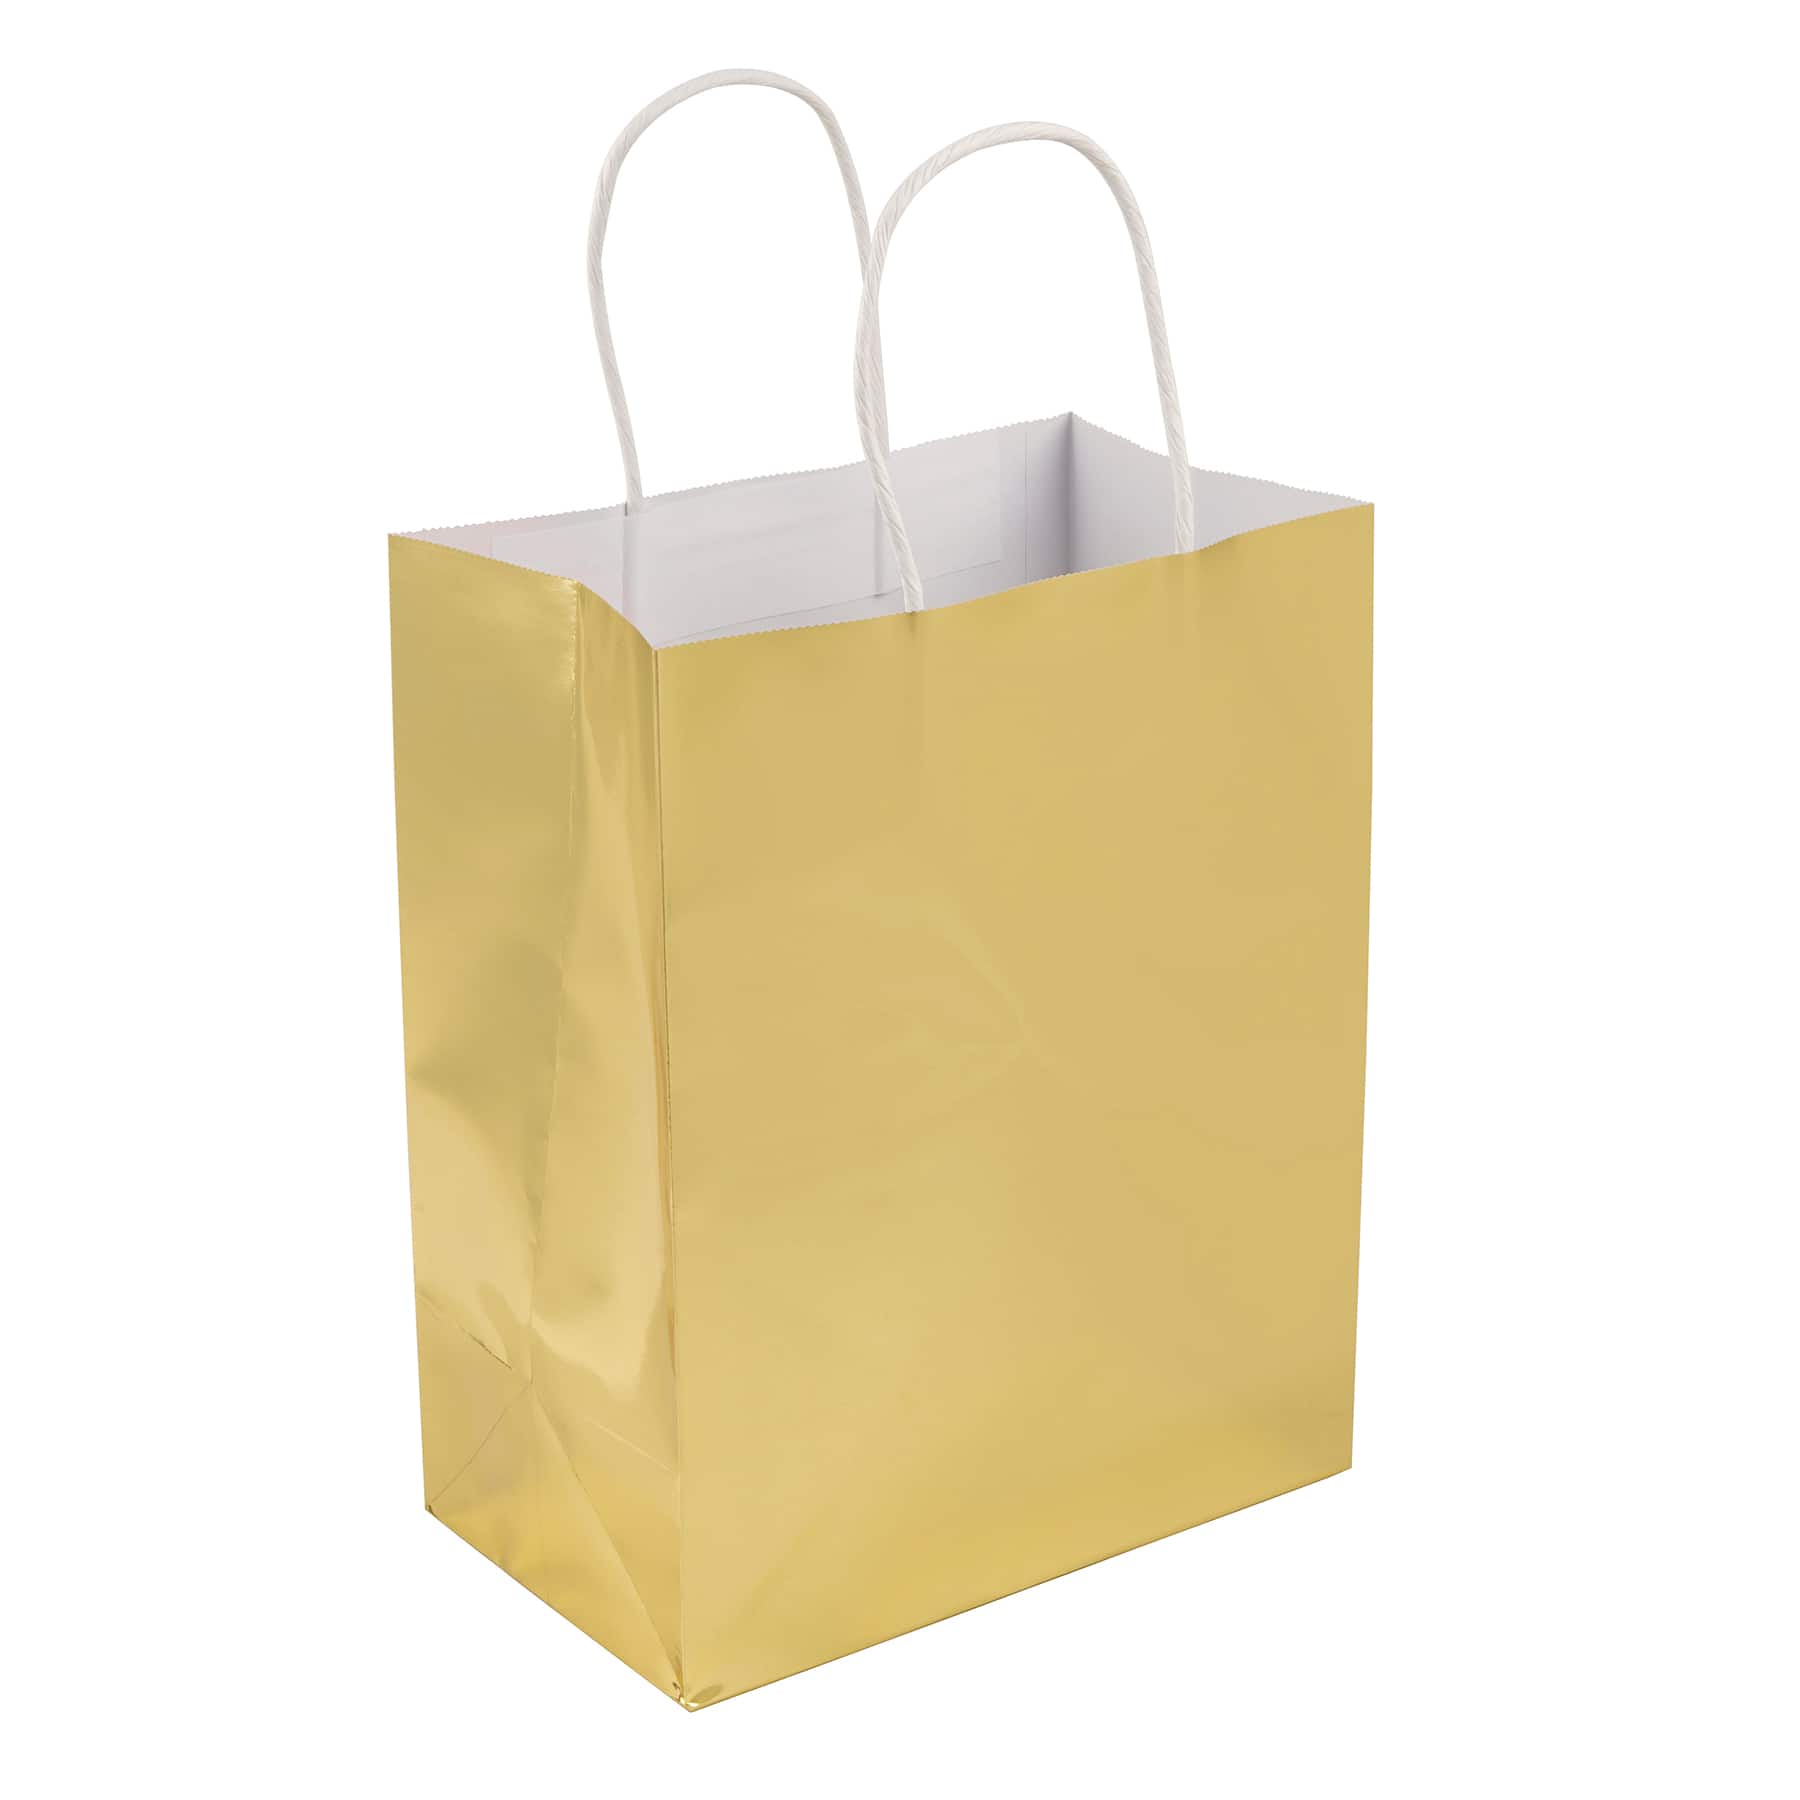 Medium Gold Gift Bag Value Pack by Celebrate It&#x2122;